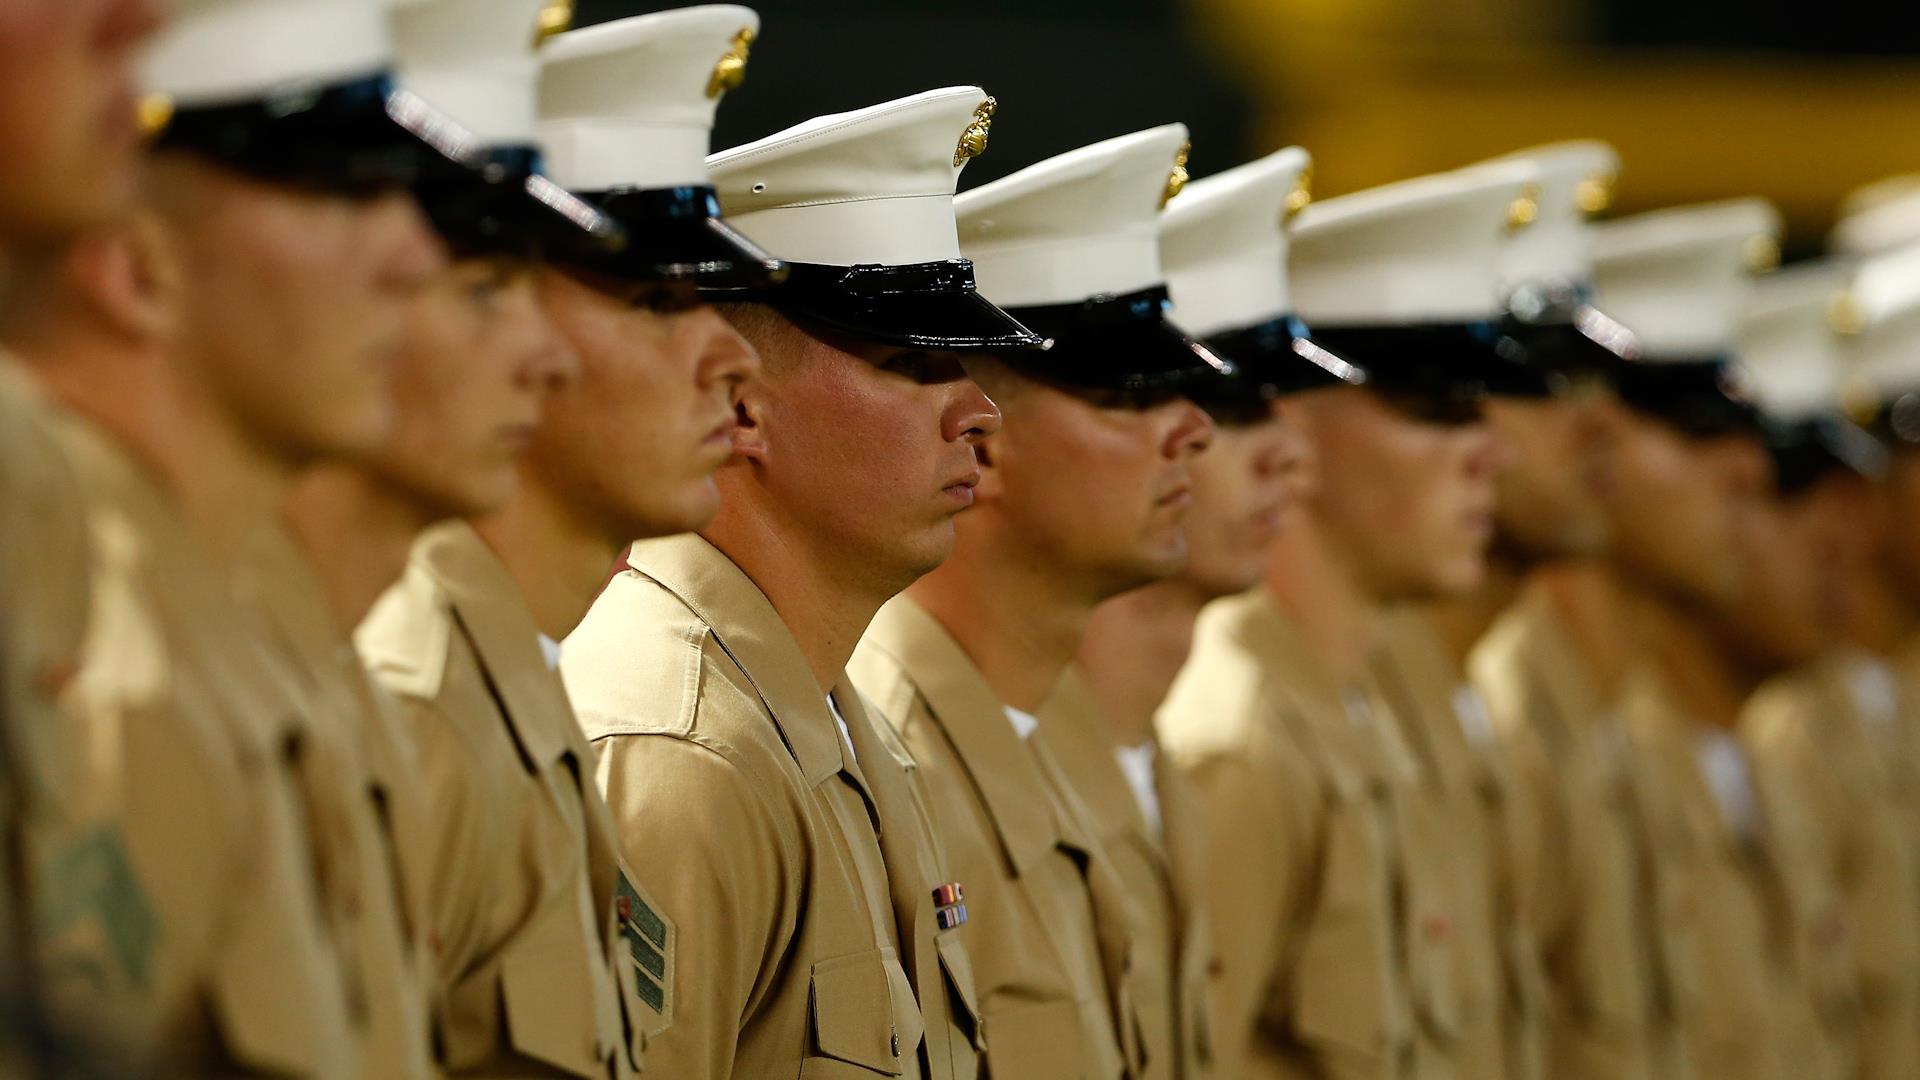 The Marines Are Taking 'Man' Out of Job Titles - NBC News